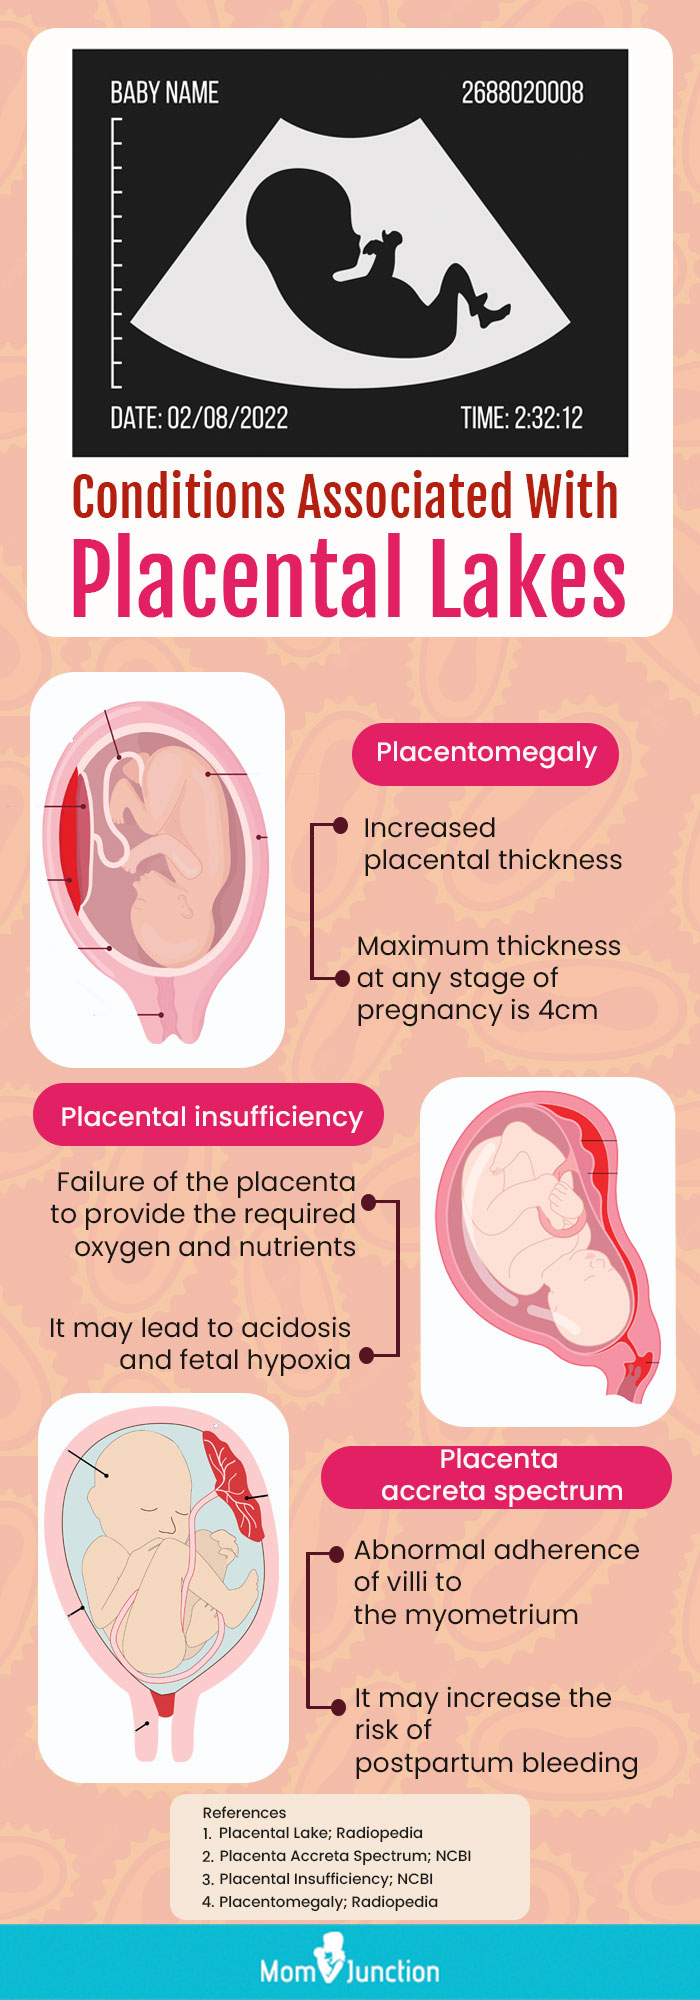 conditions associated with placental lakes (infographic)